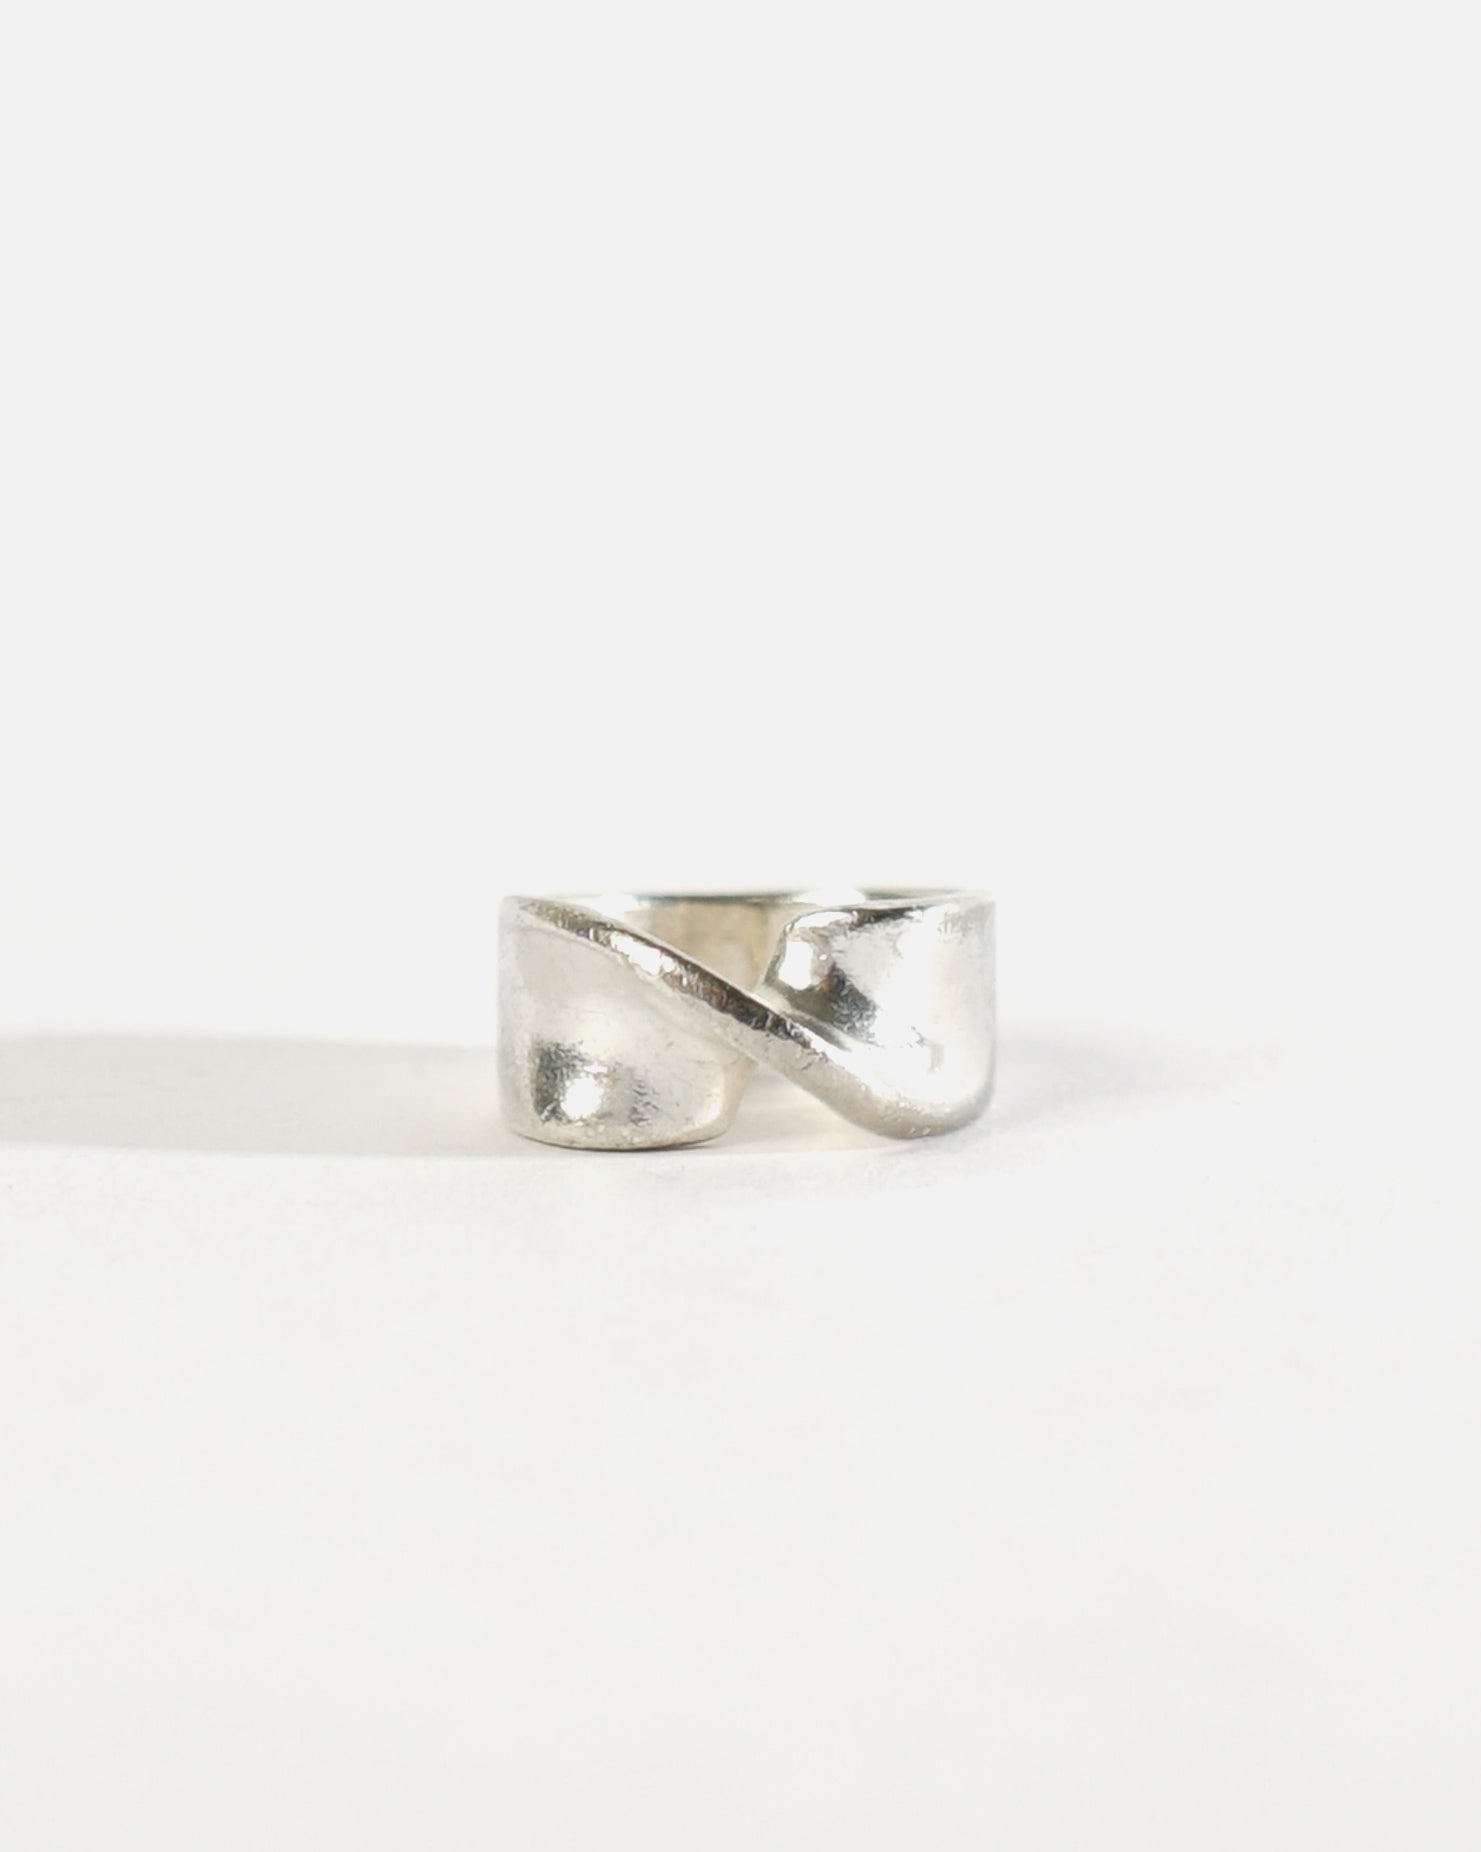 Silver Twist Band Ring / size: 8